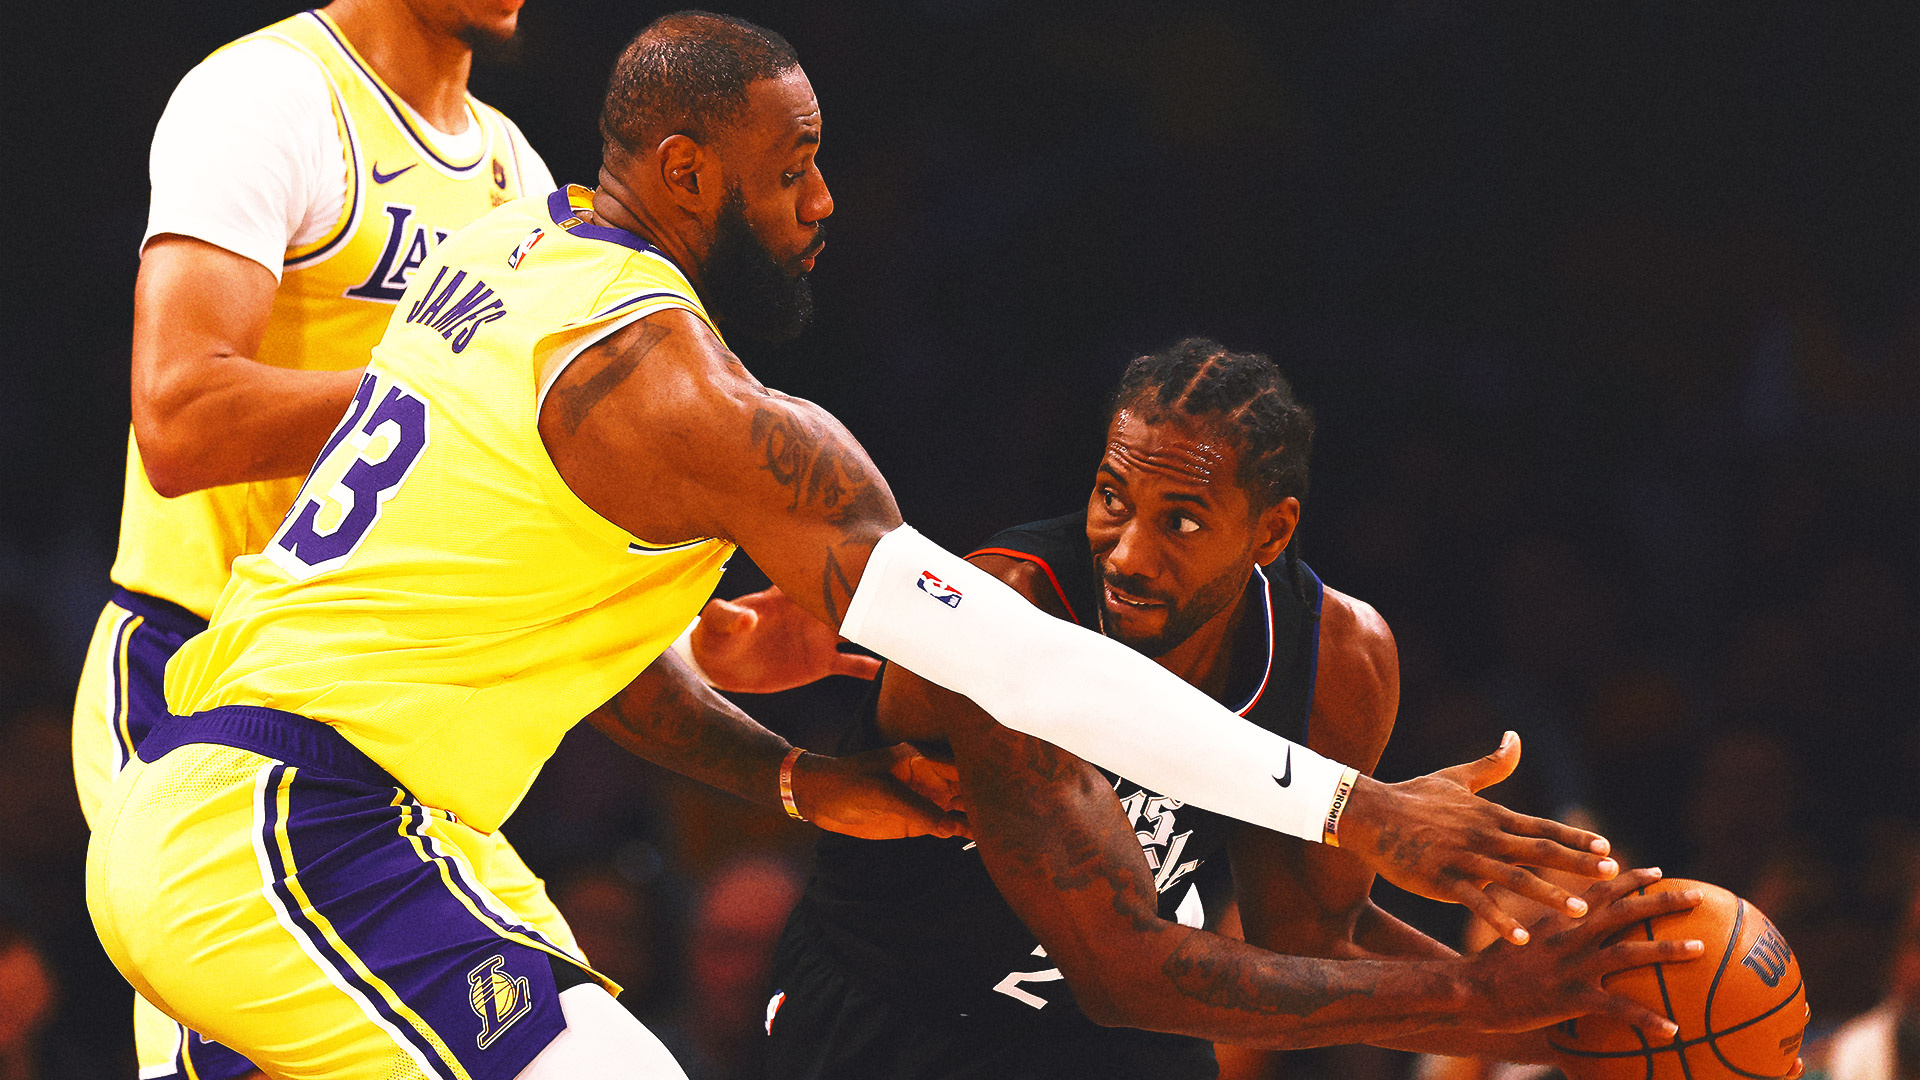 LeBron James scores 35 as Lakers snap 11-game losing streak against Clippers